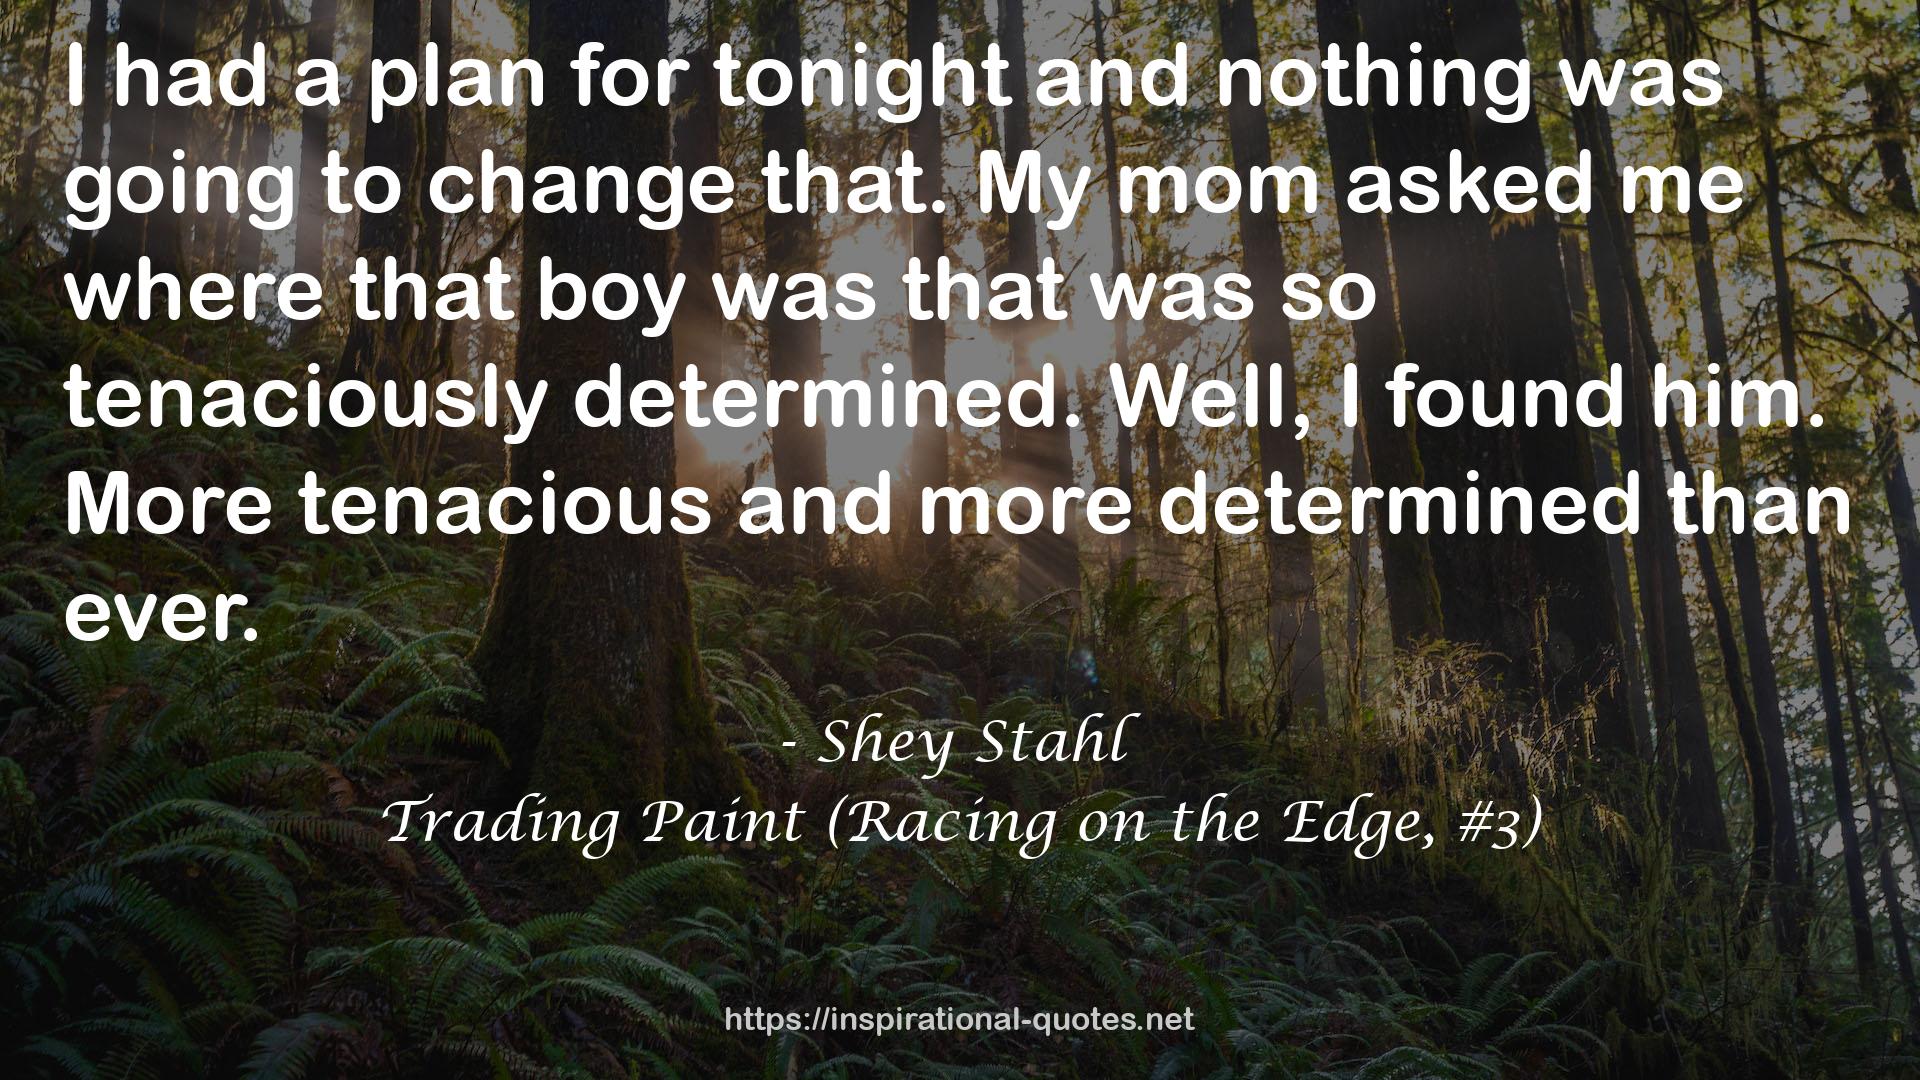 Trading Paint (Racing on the Edge, #3) QUOTES